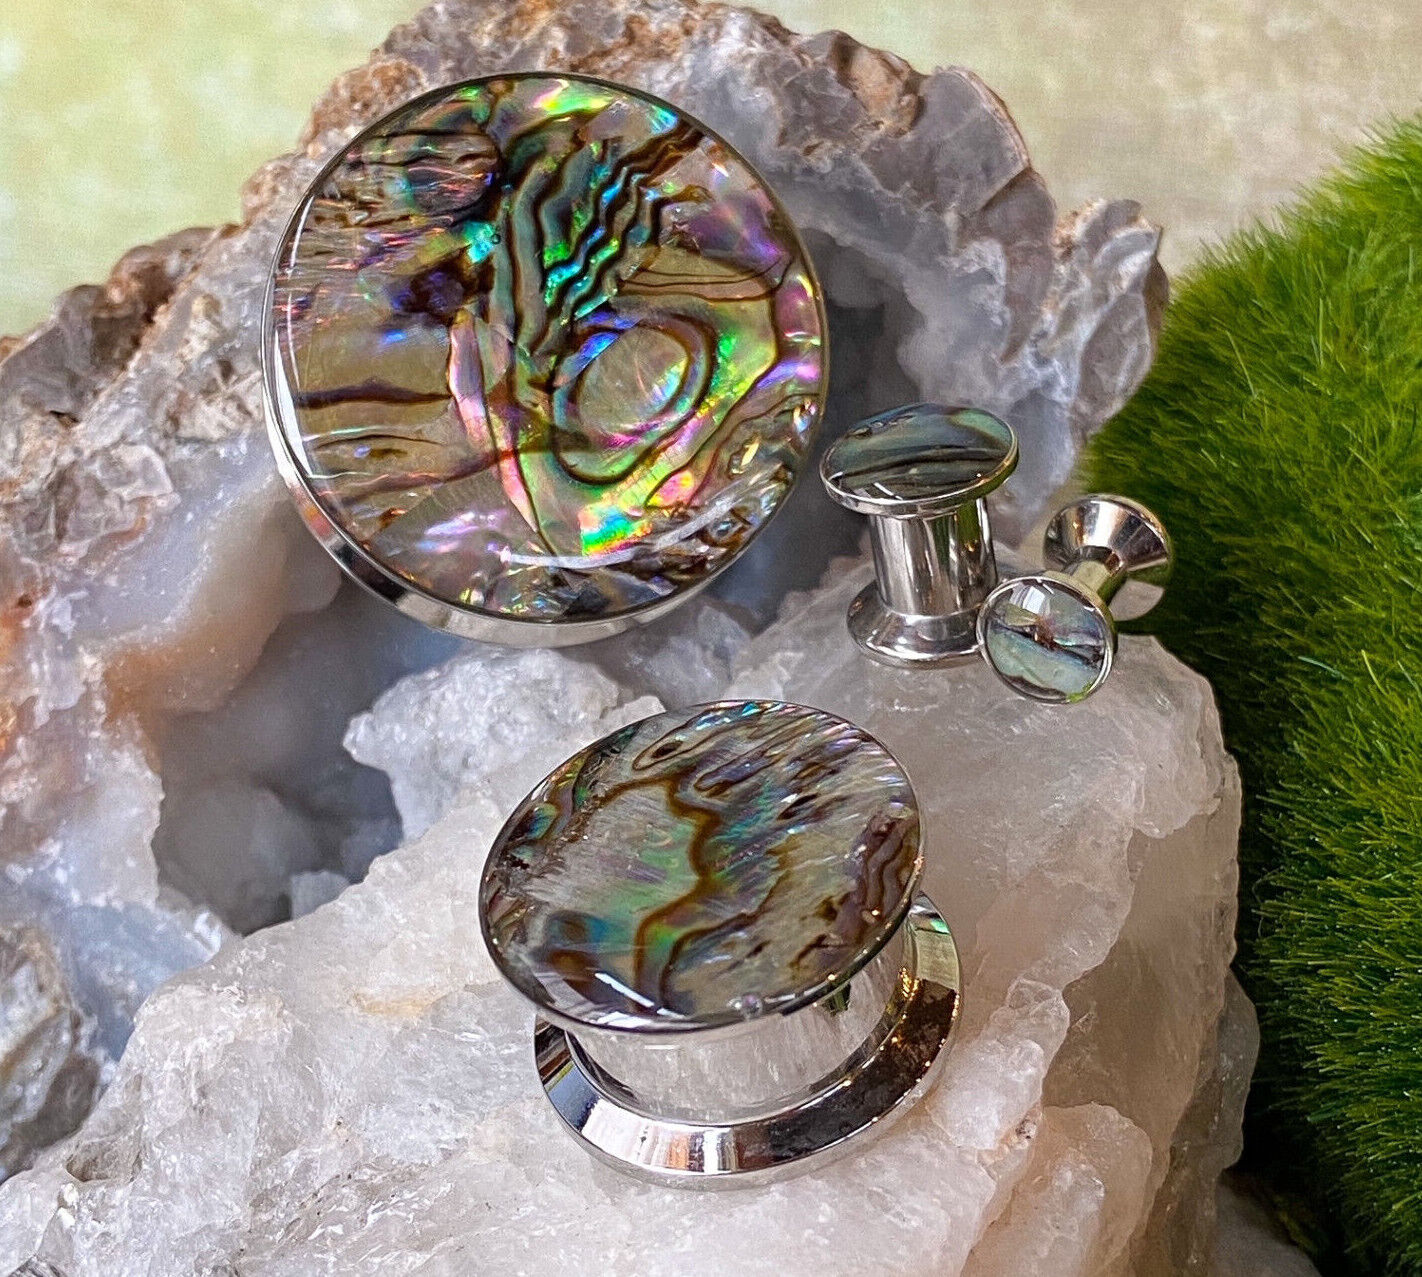 PAIR of Unique Abalone Inlay Steel Screw Fit Plugs - Gauges 8g (3.2mm) thru 1" (25mm) available!